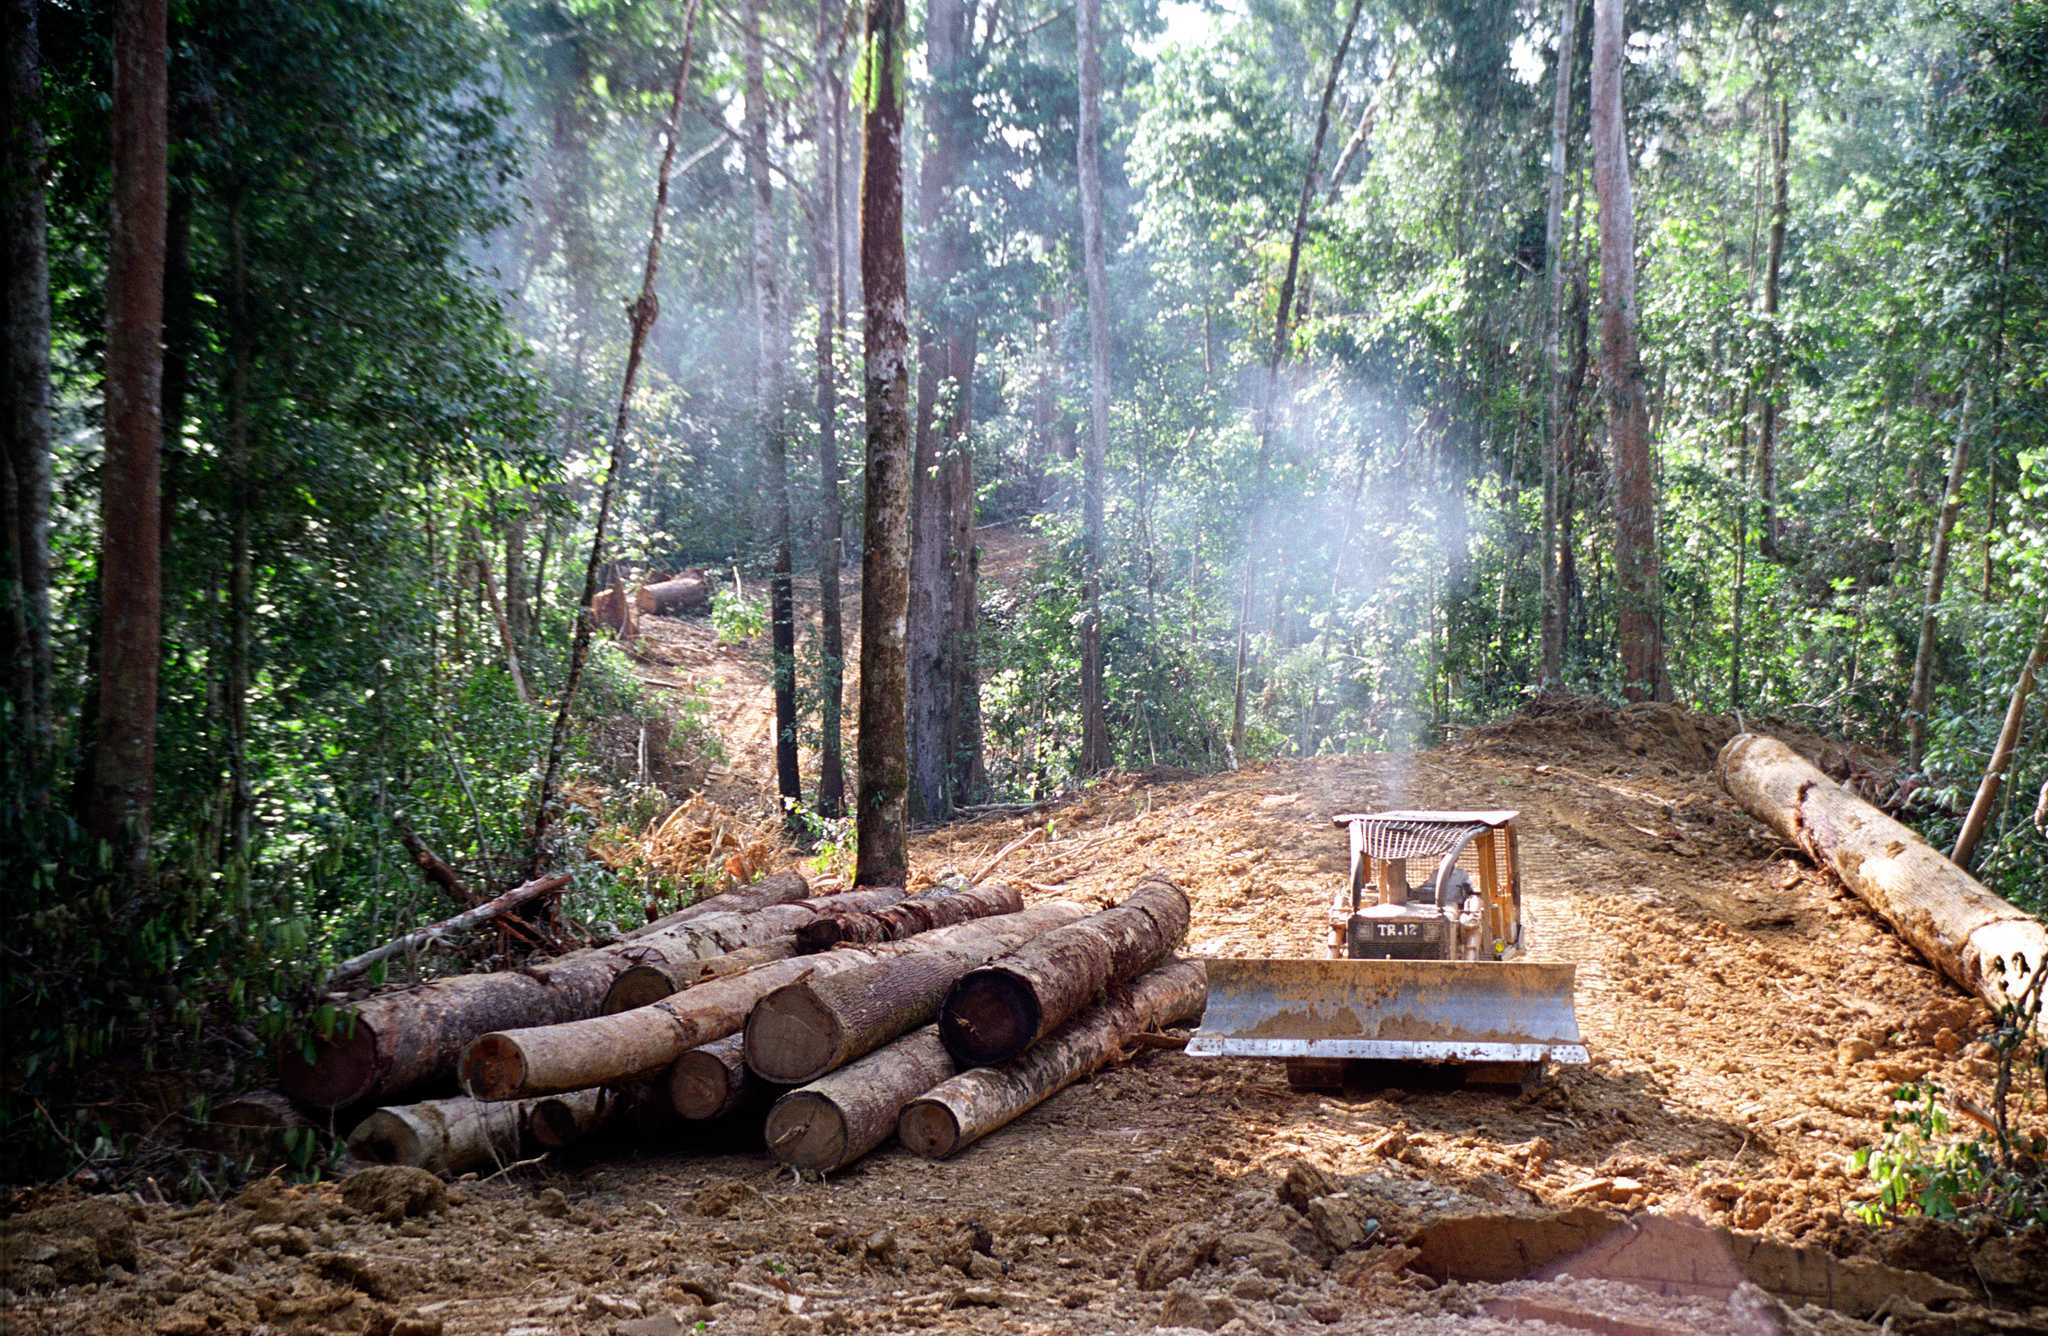 Trees harvested in an oil palm concession in East Kalimantan, in 2003.